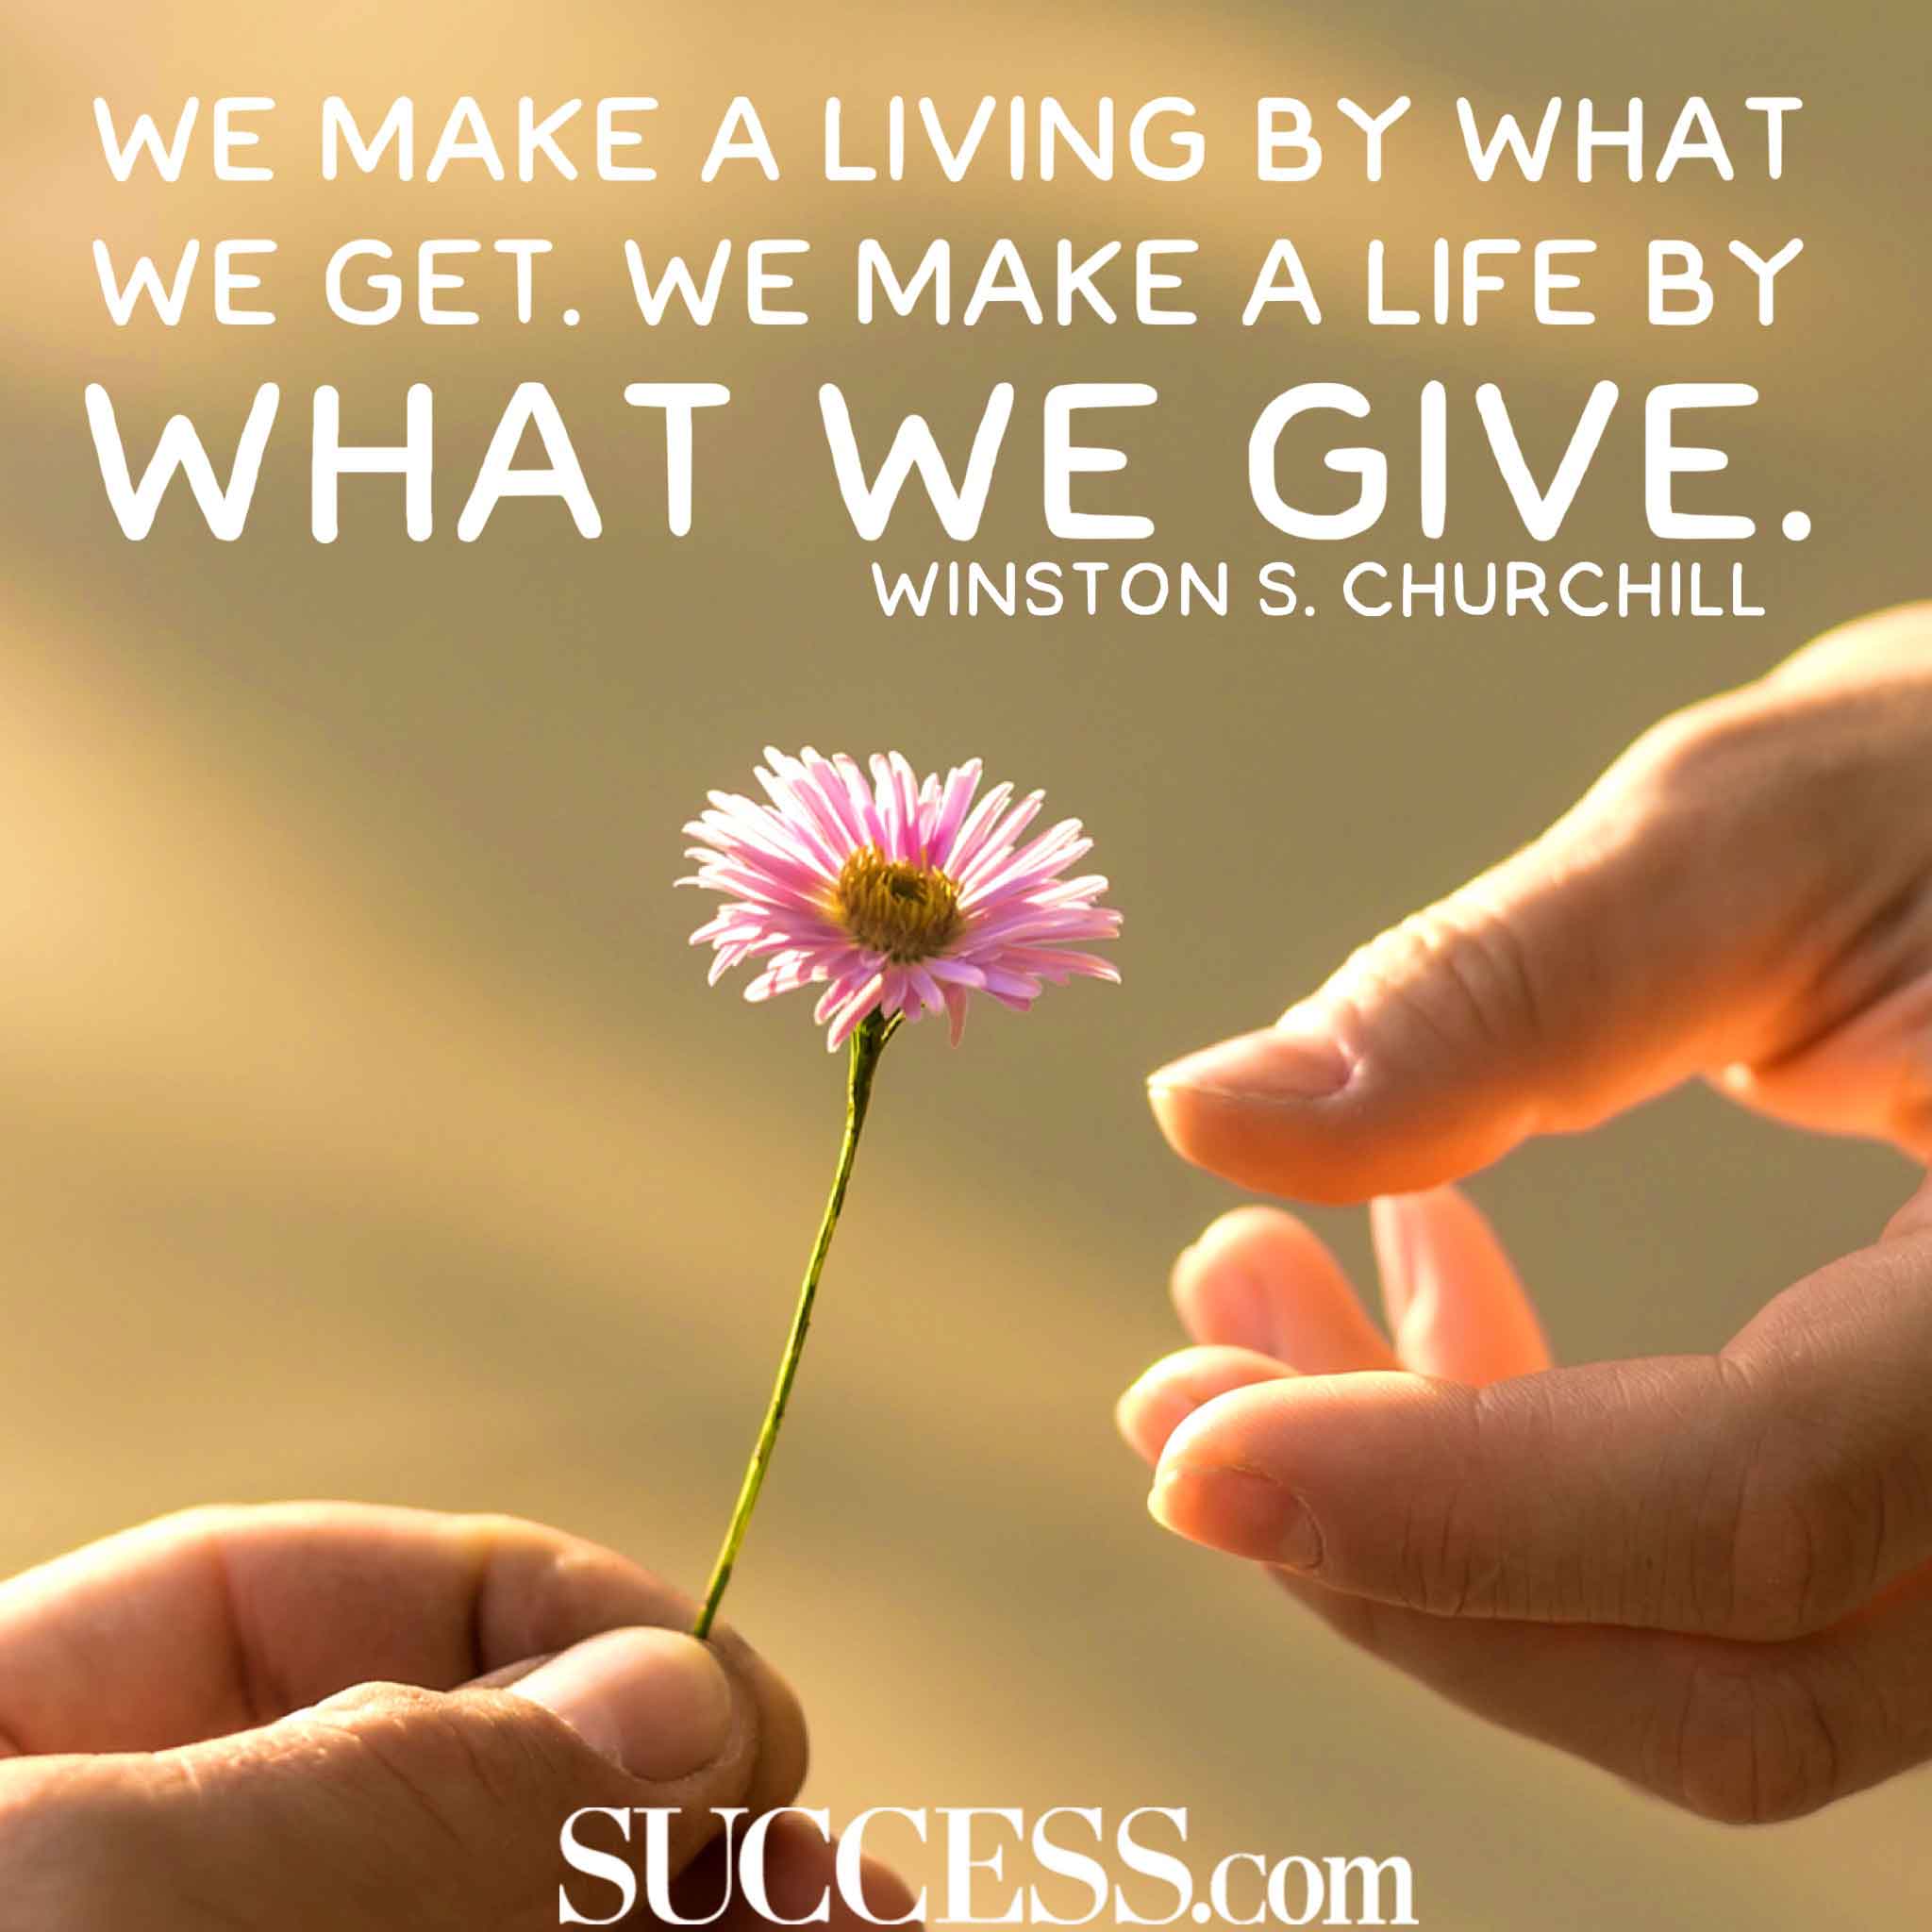 15 Inspiring Quotes About Giving